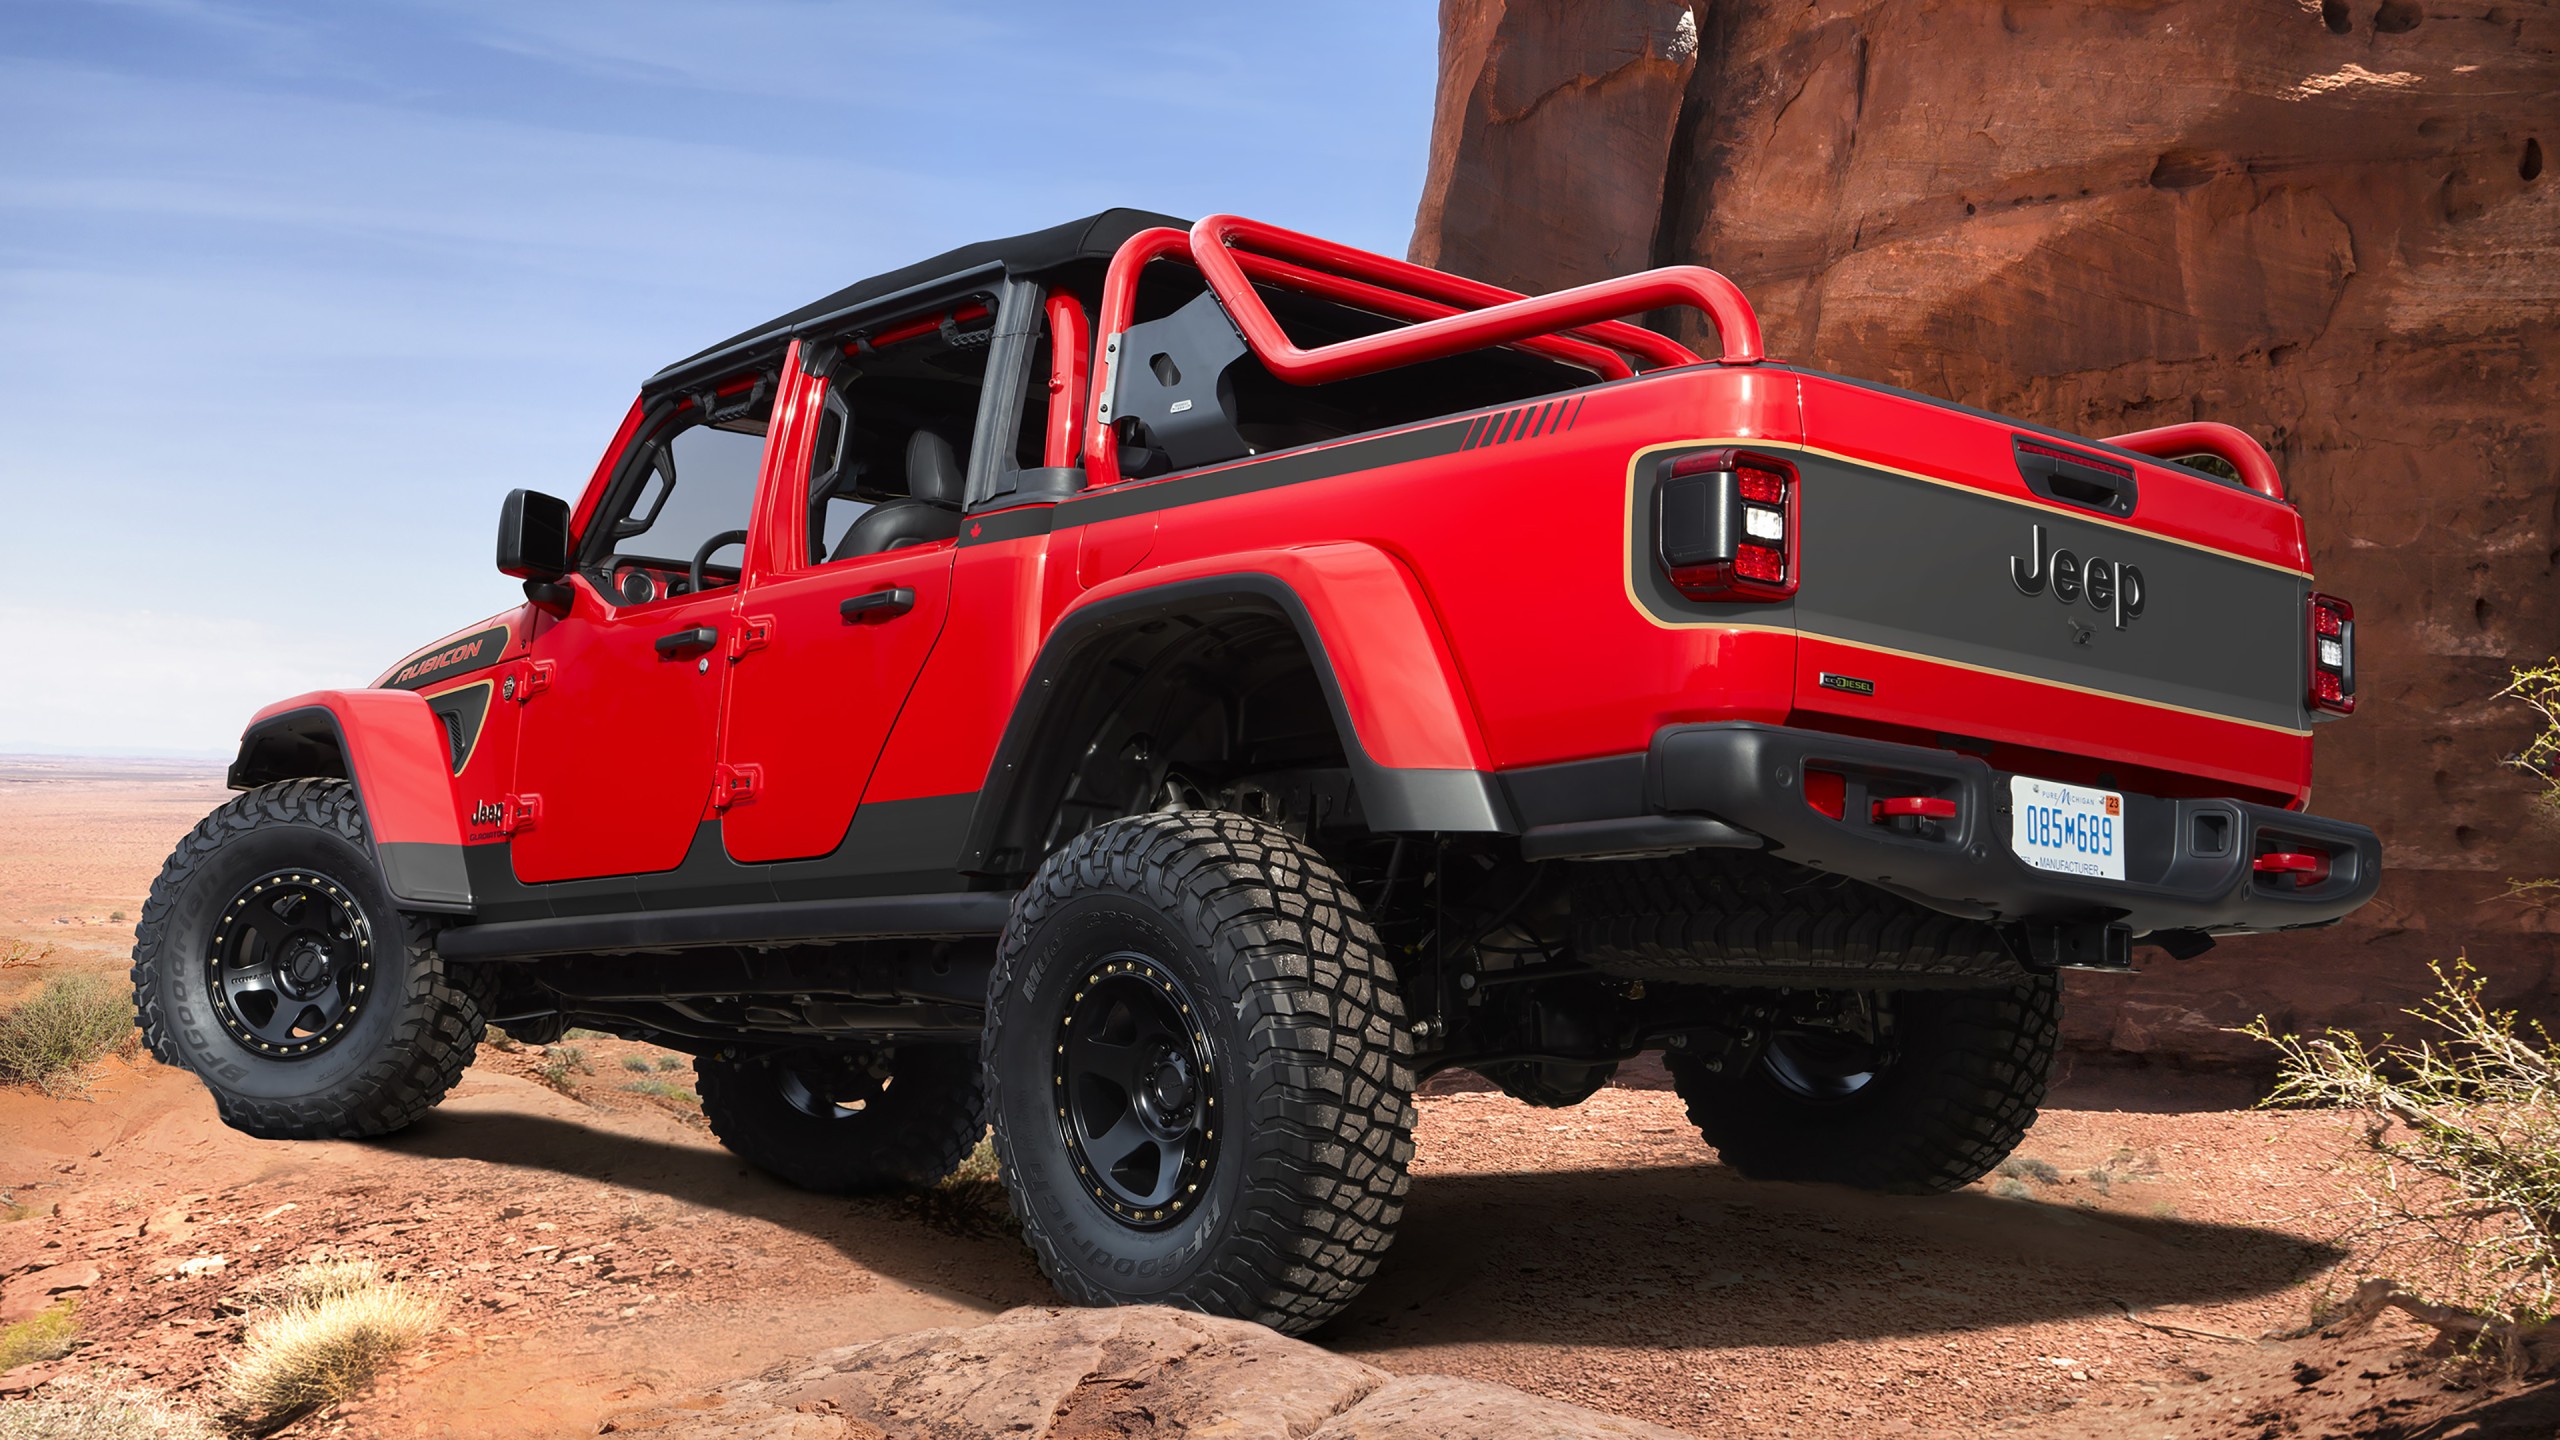 Jeep Red Bare Gladiator Rubicon 2021 4k 2 Wallpaper Hd Car Wallpapers Id 17696